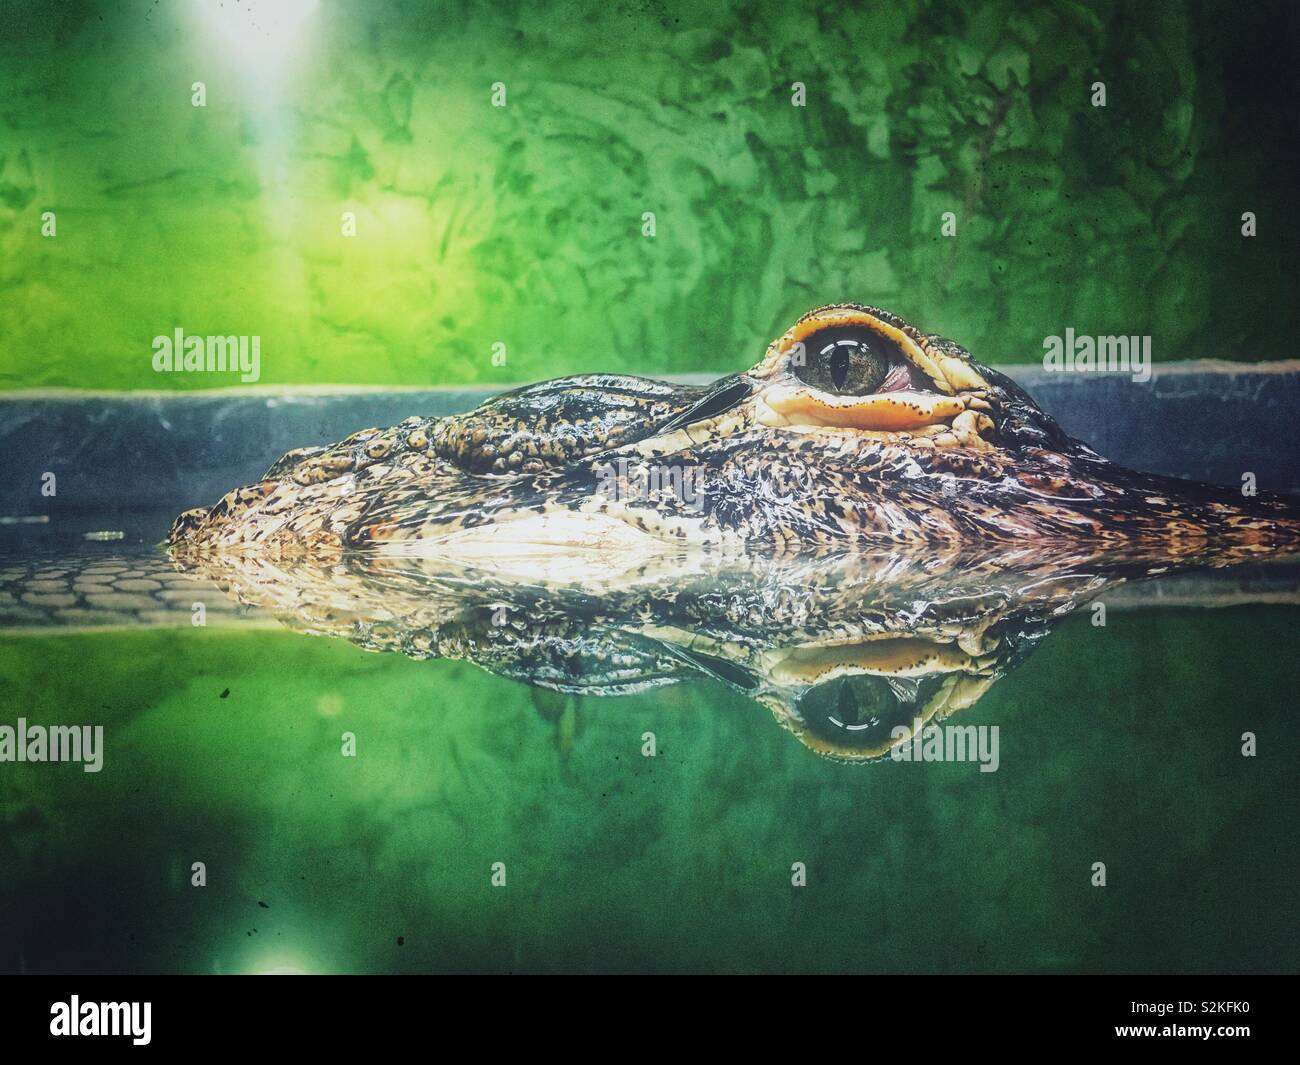 Alligator eye above water with reflection in still water creating interesting symmetry Stock Photo